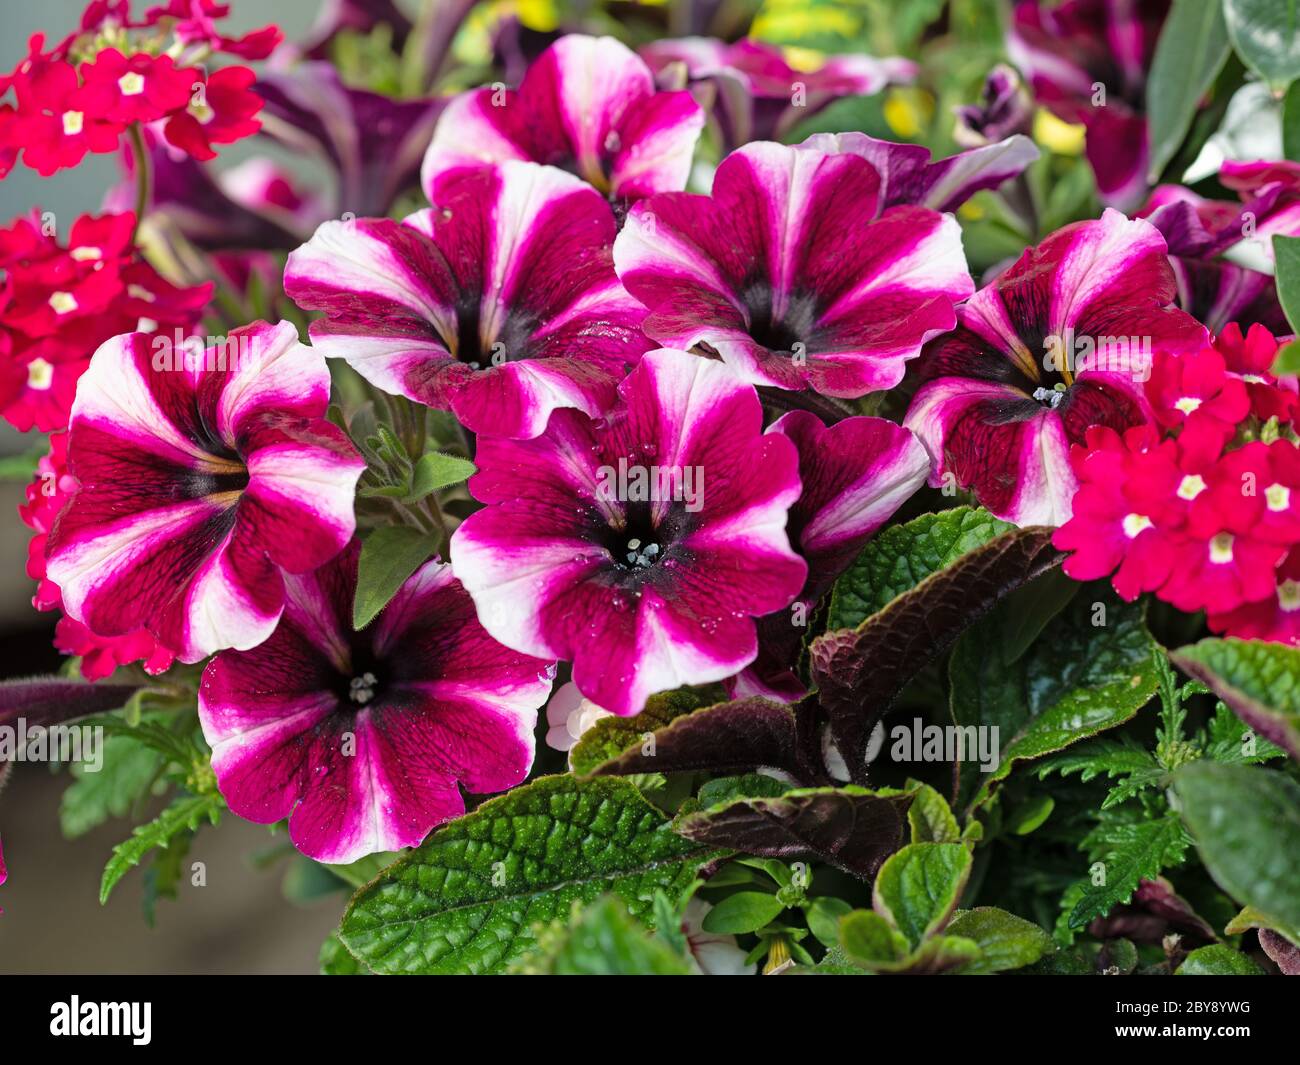 Flowering petunias in a close-up Stock Photo